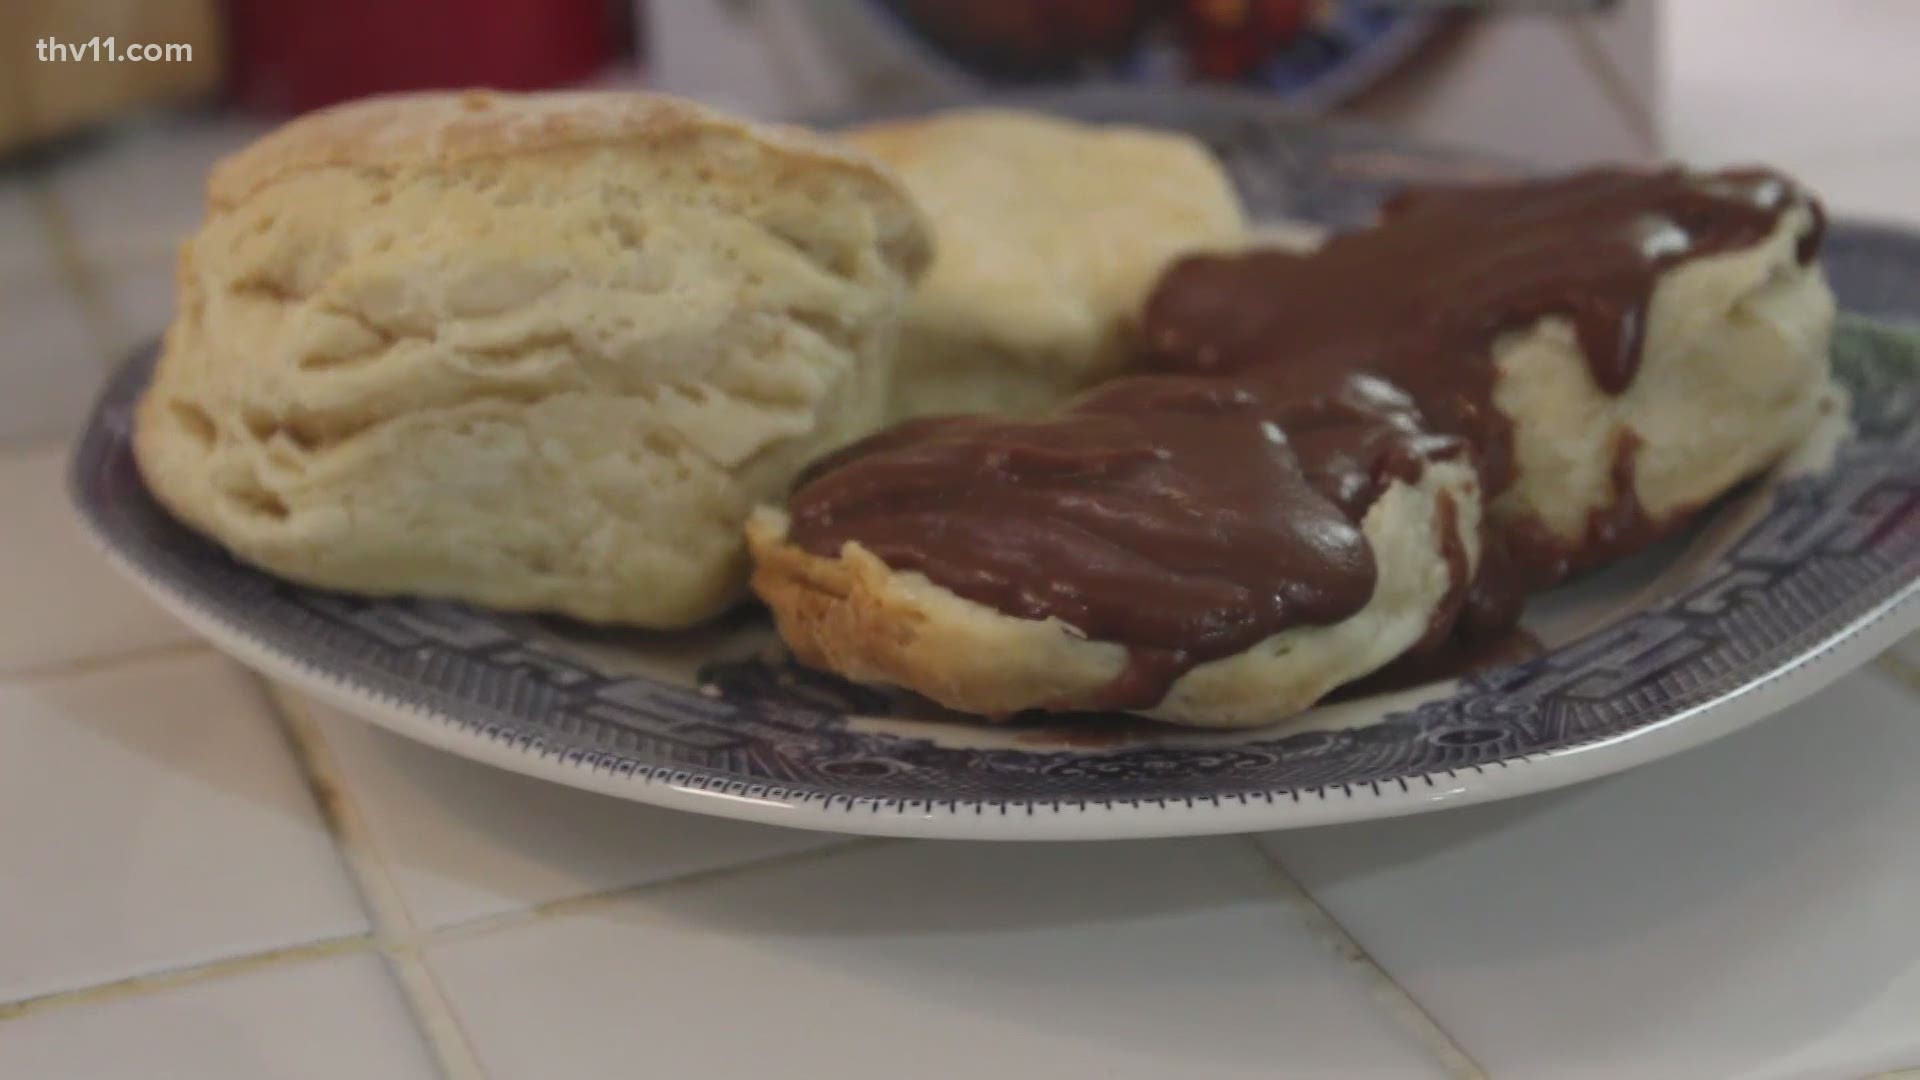 Kat Robinson whips up a batch of chocolate gravy and warm biscuits. Find this recipe and more in her new cookbook "A Bite of Arkansas."